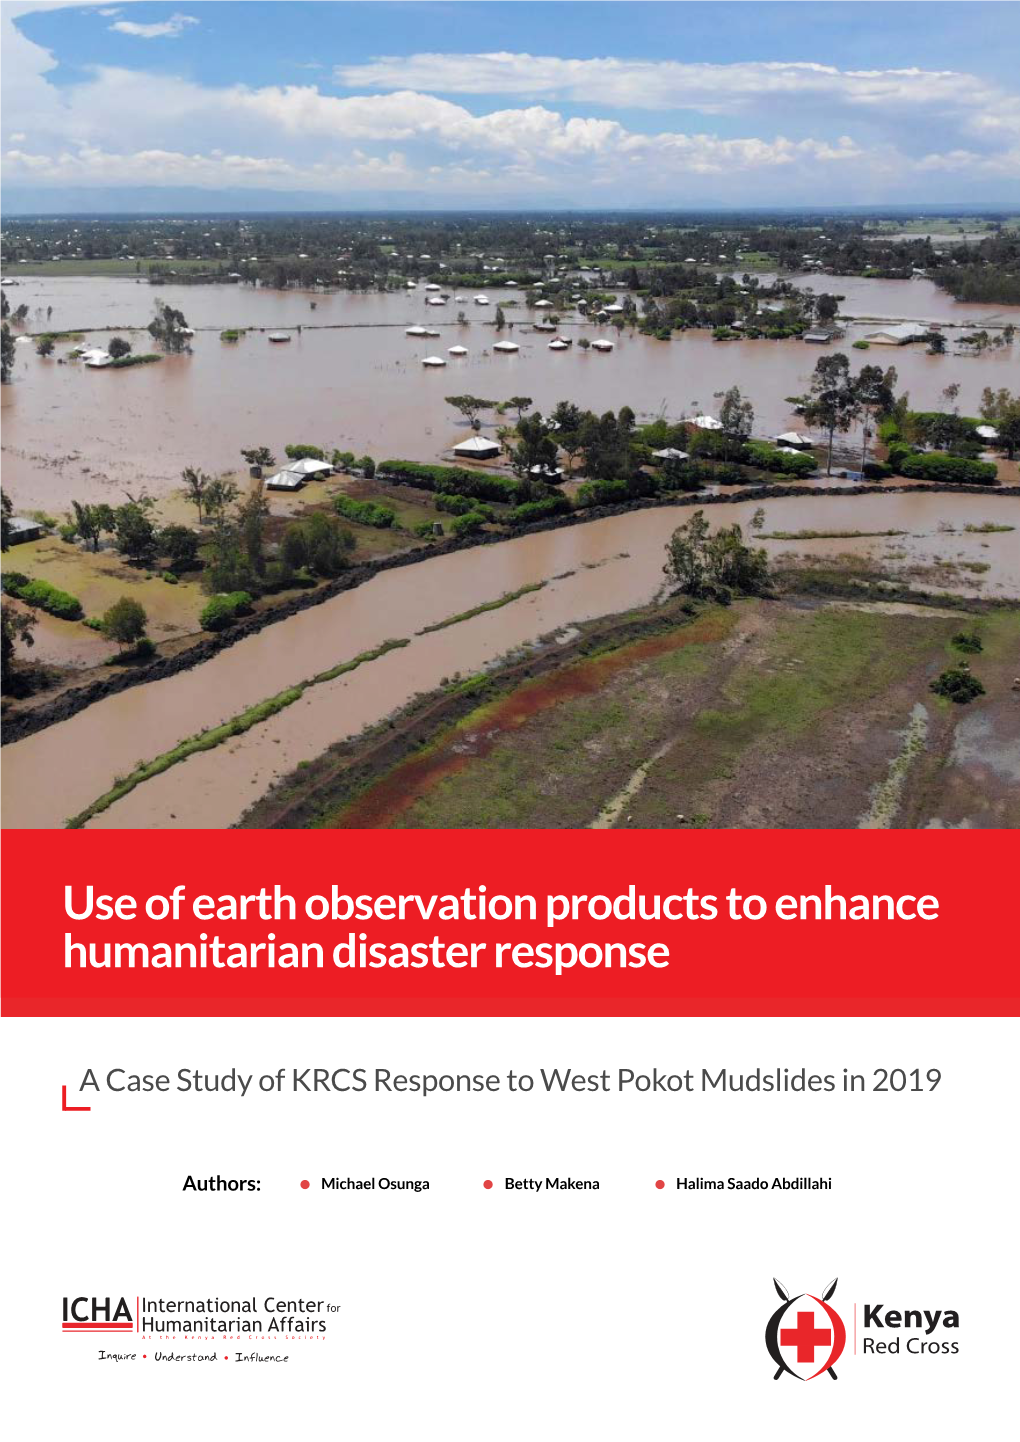 Use of Earth Observation Products to Enhance Humanitarian Disaster Response